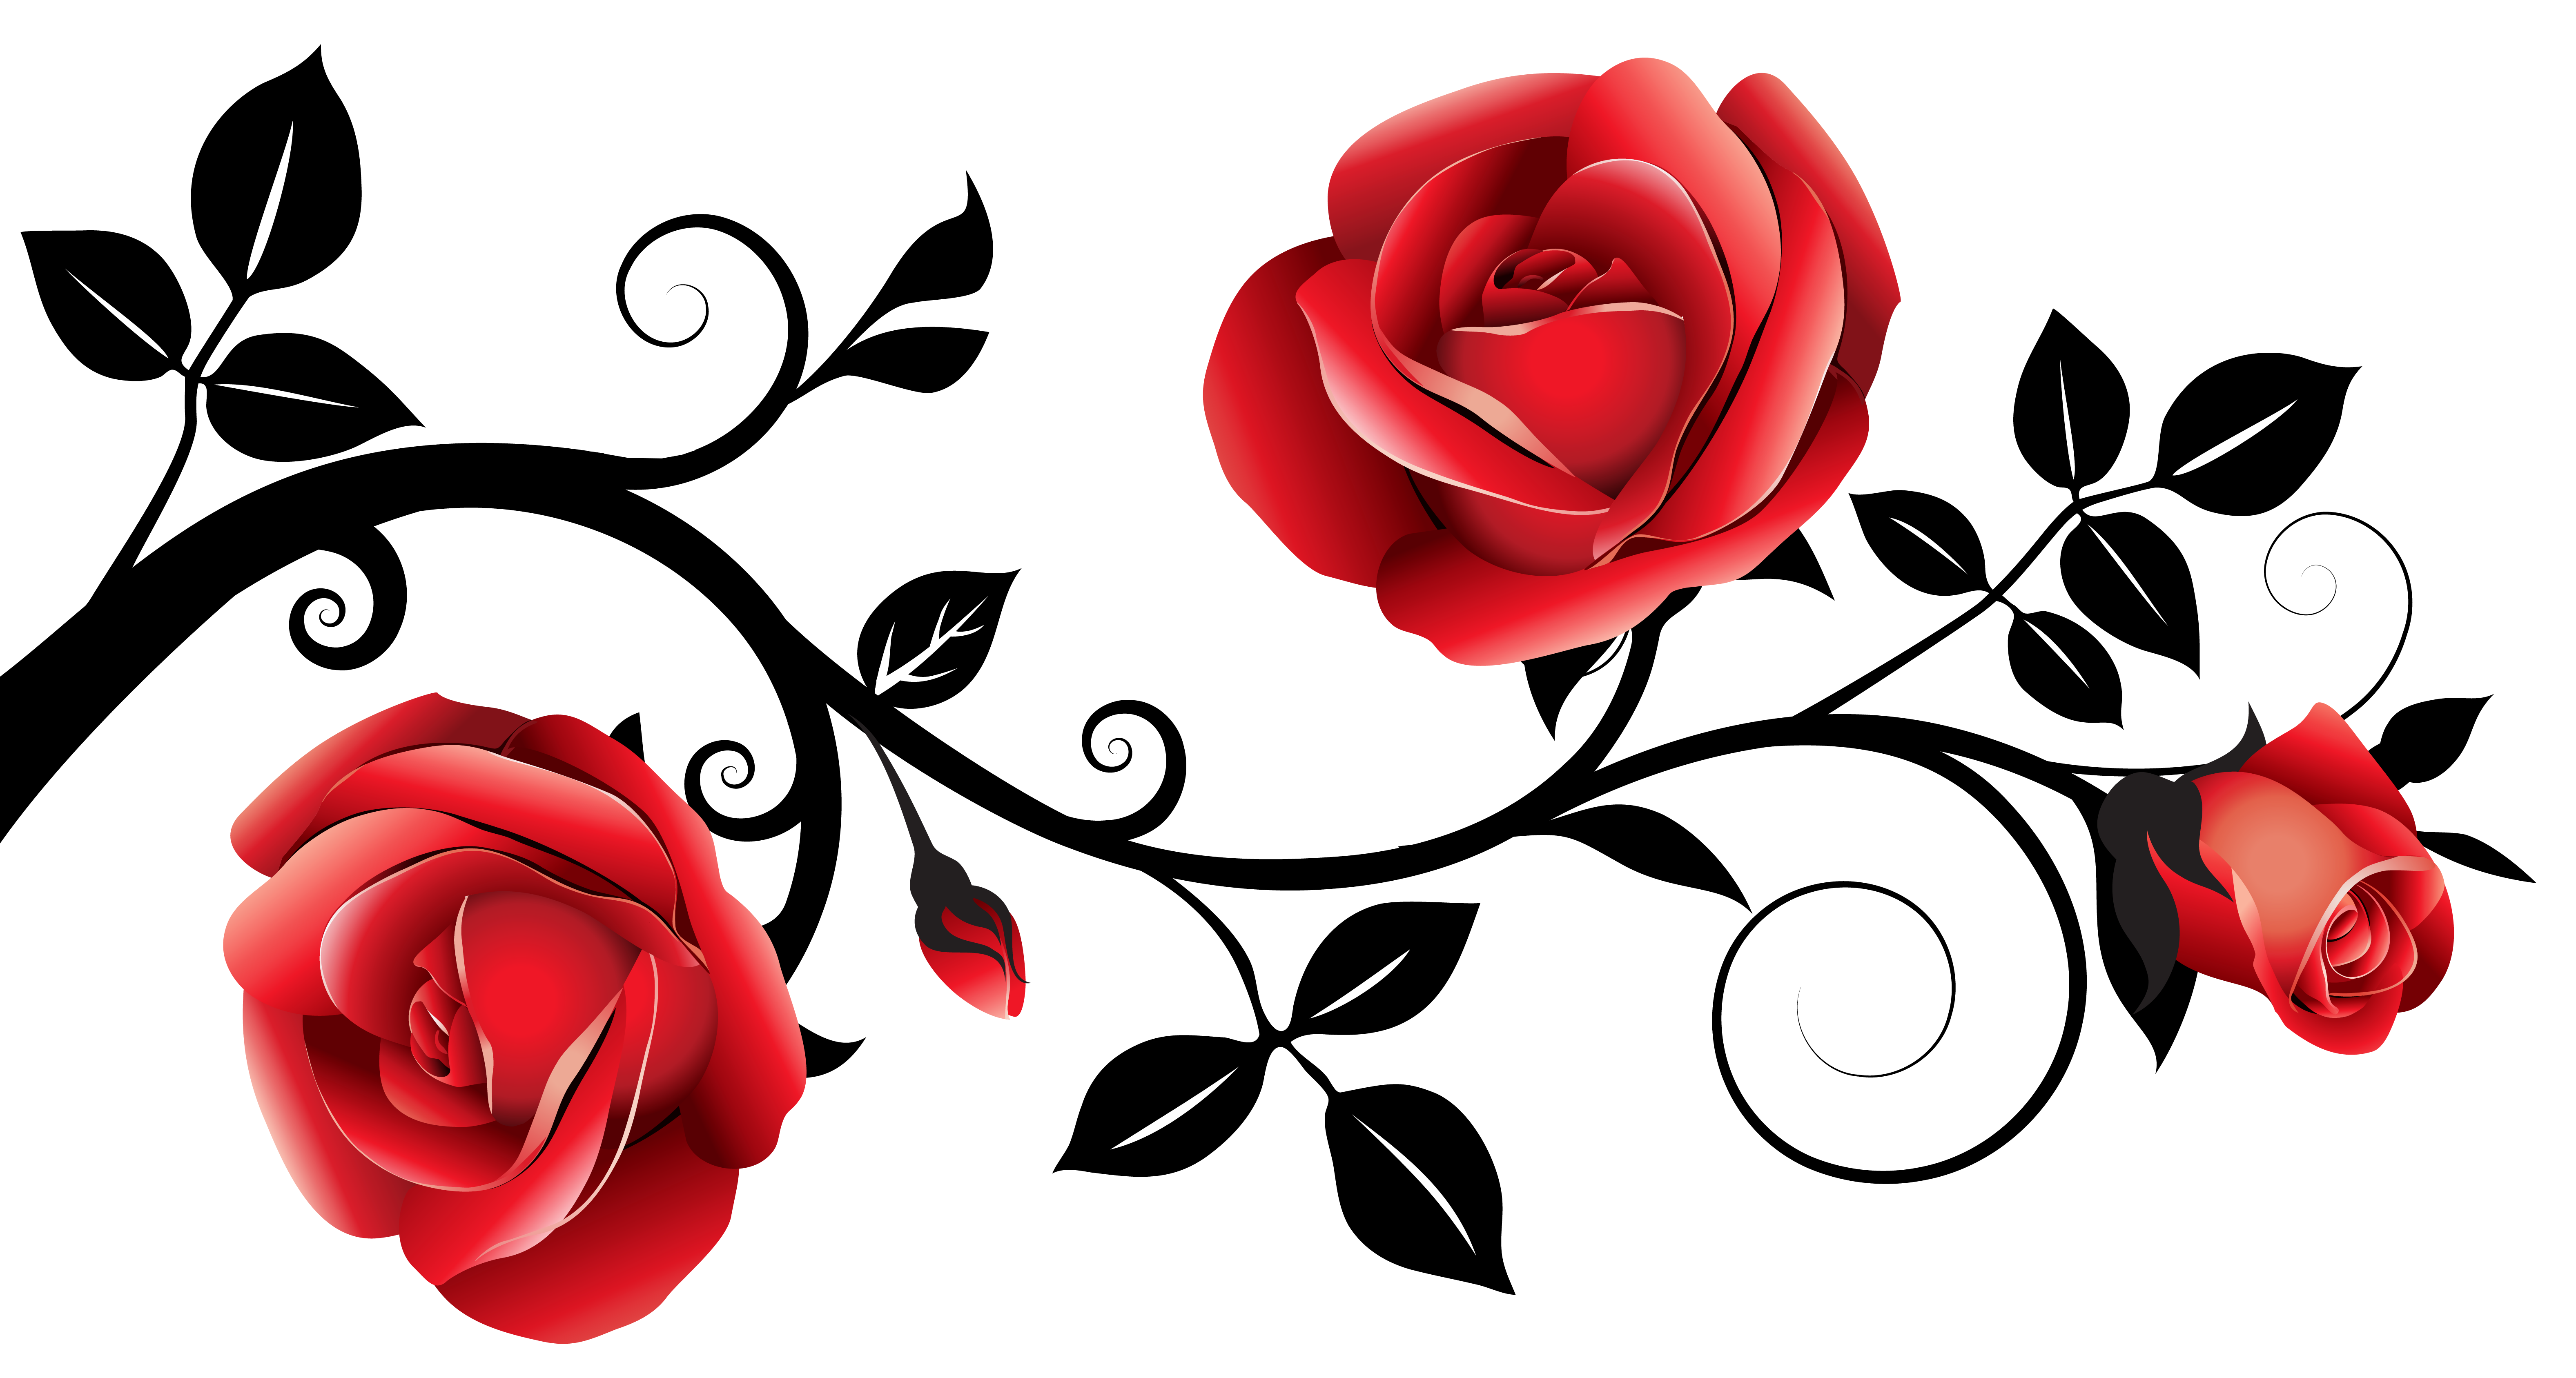 Clipart roses banner. Cilpart cozy design red